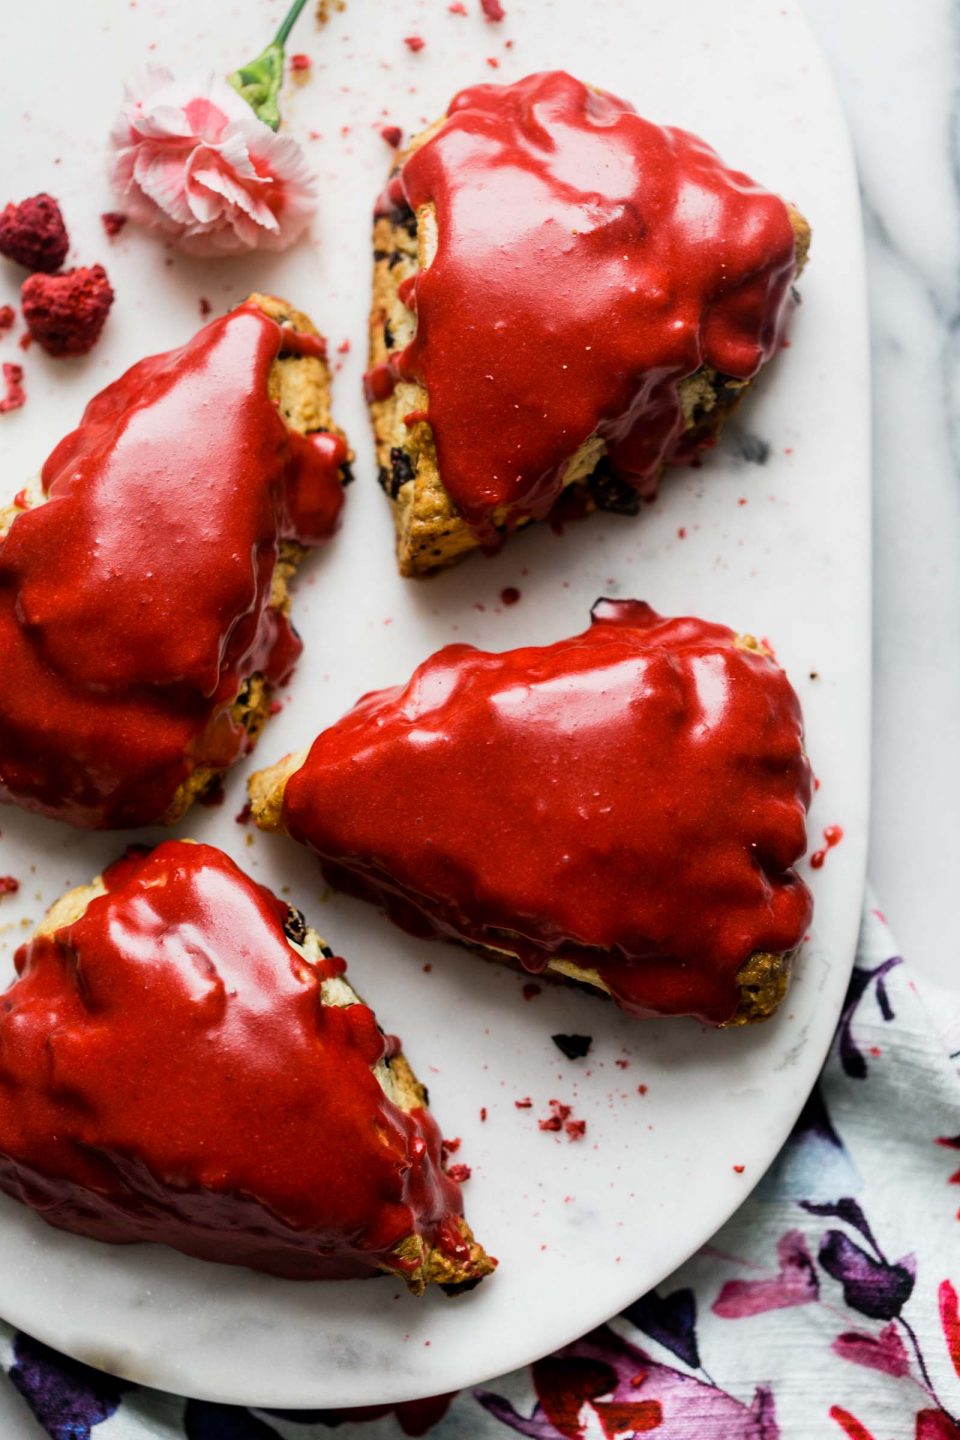 tender & flaky scones bursting with dark chocolate chunks & topped with the perfect raspberry glaze. raspberry dark chocolate chunk scones are perfect for galentine’s day, a wedding shower, baby shower, or any ladies’ brunch! #scones #sconerecipe #galentinesday #brunchrecipe #playswellwithbutter